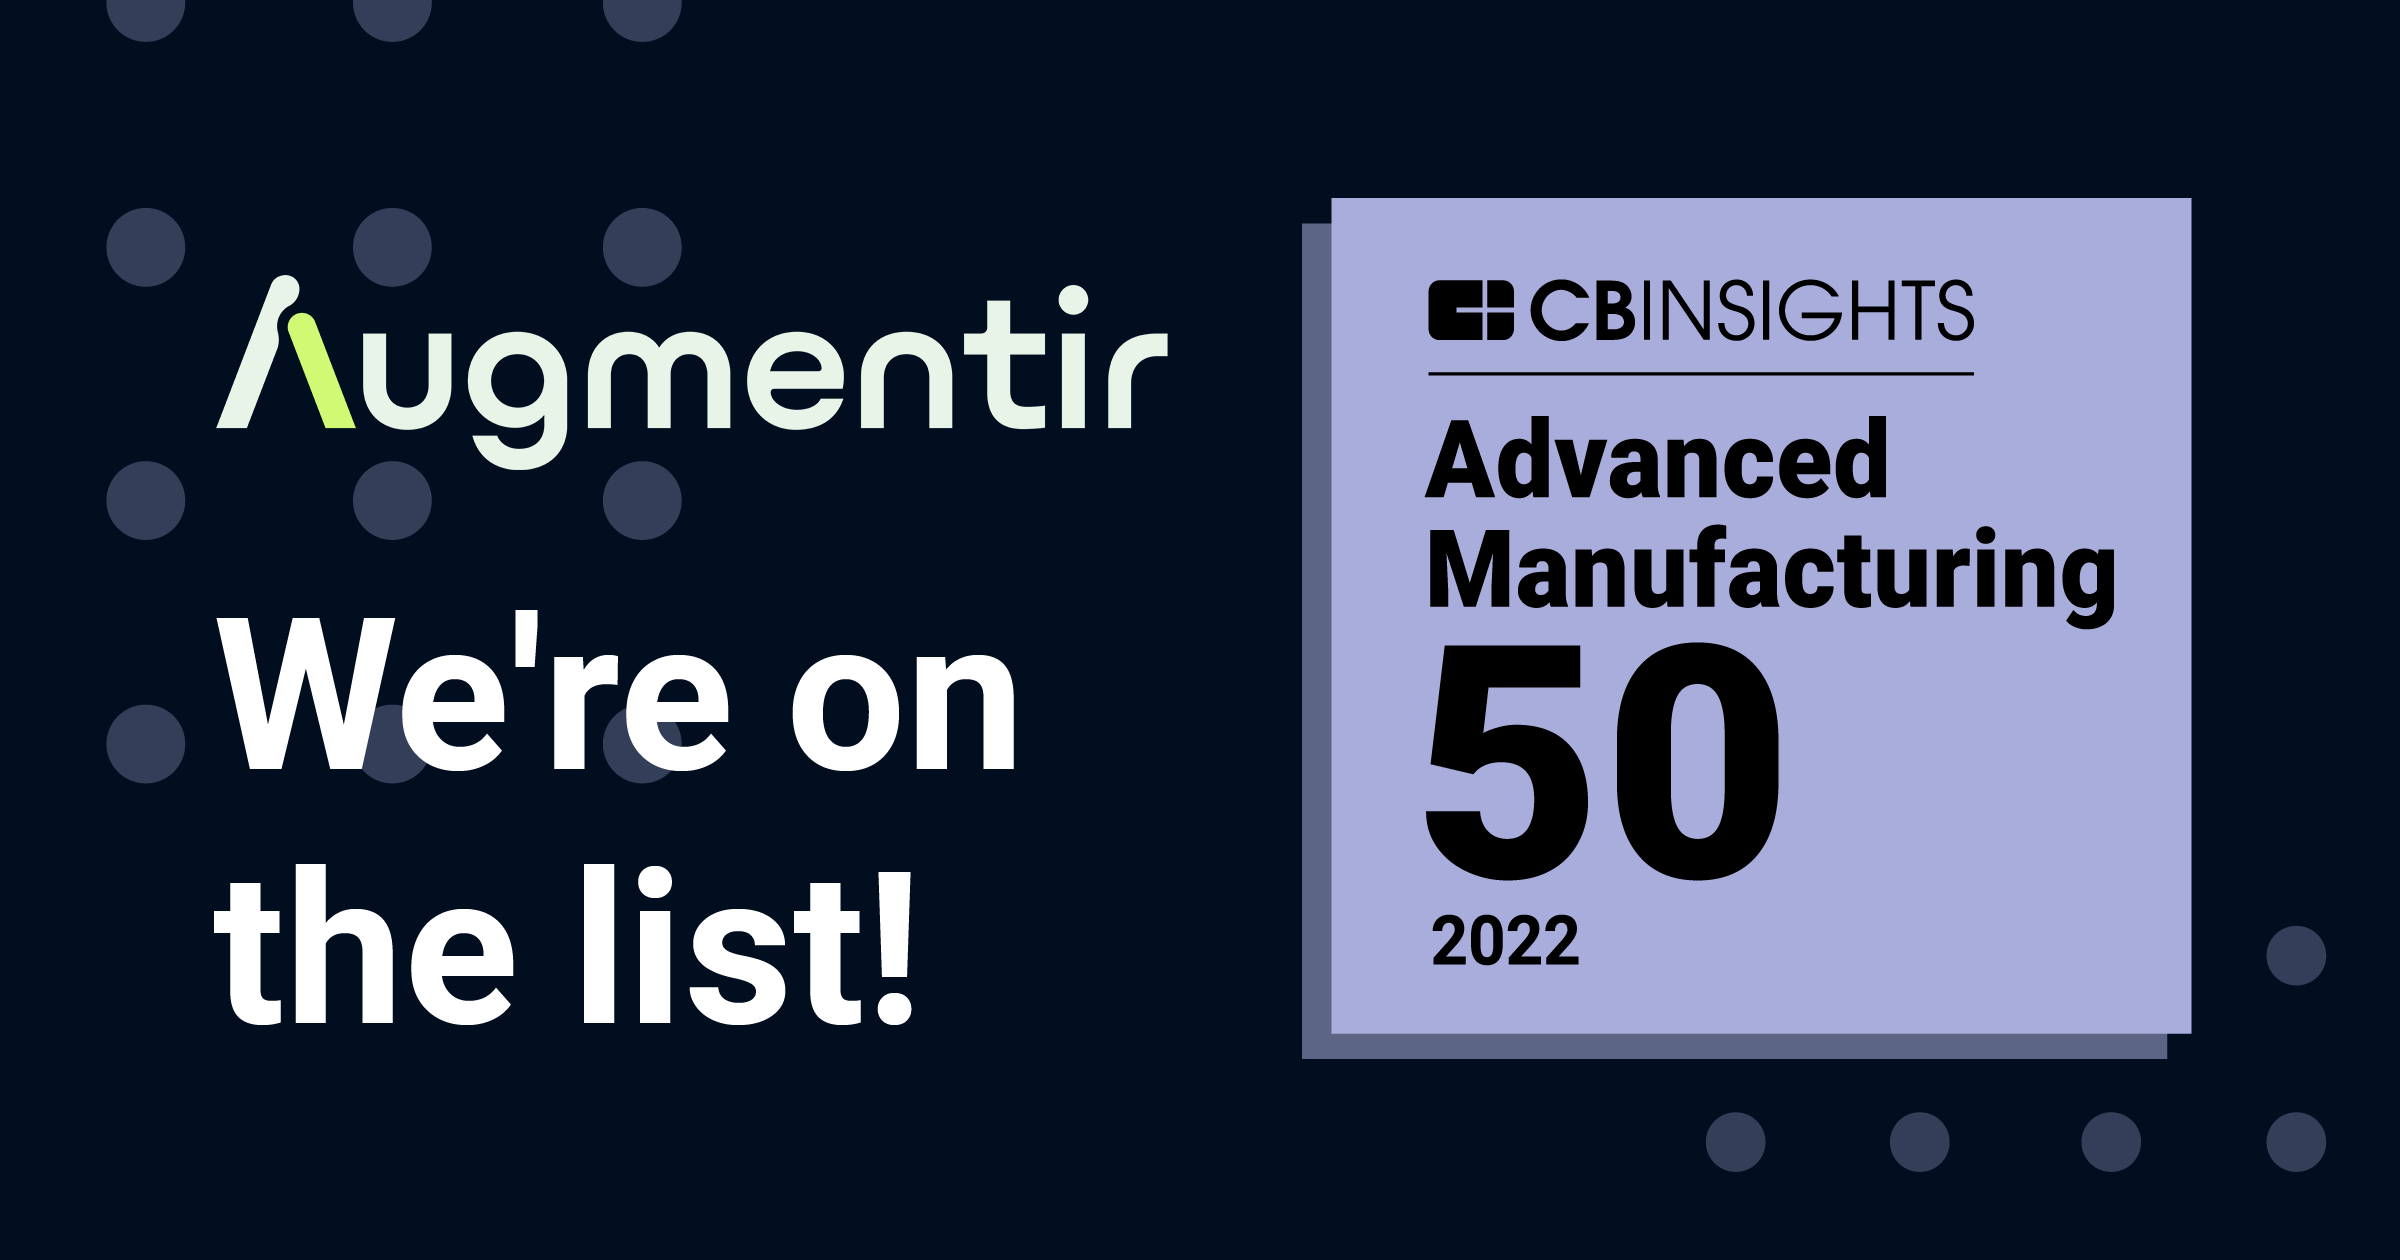 Augmentir named to CB Insights Advanced Manufacturing Top 50